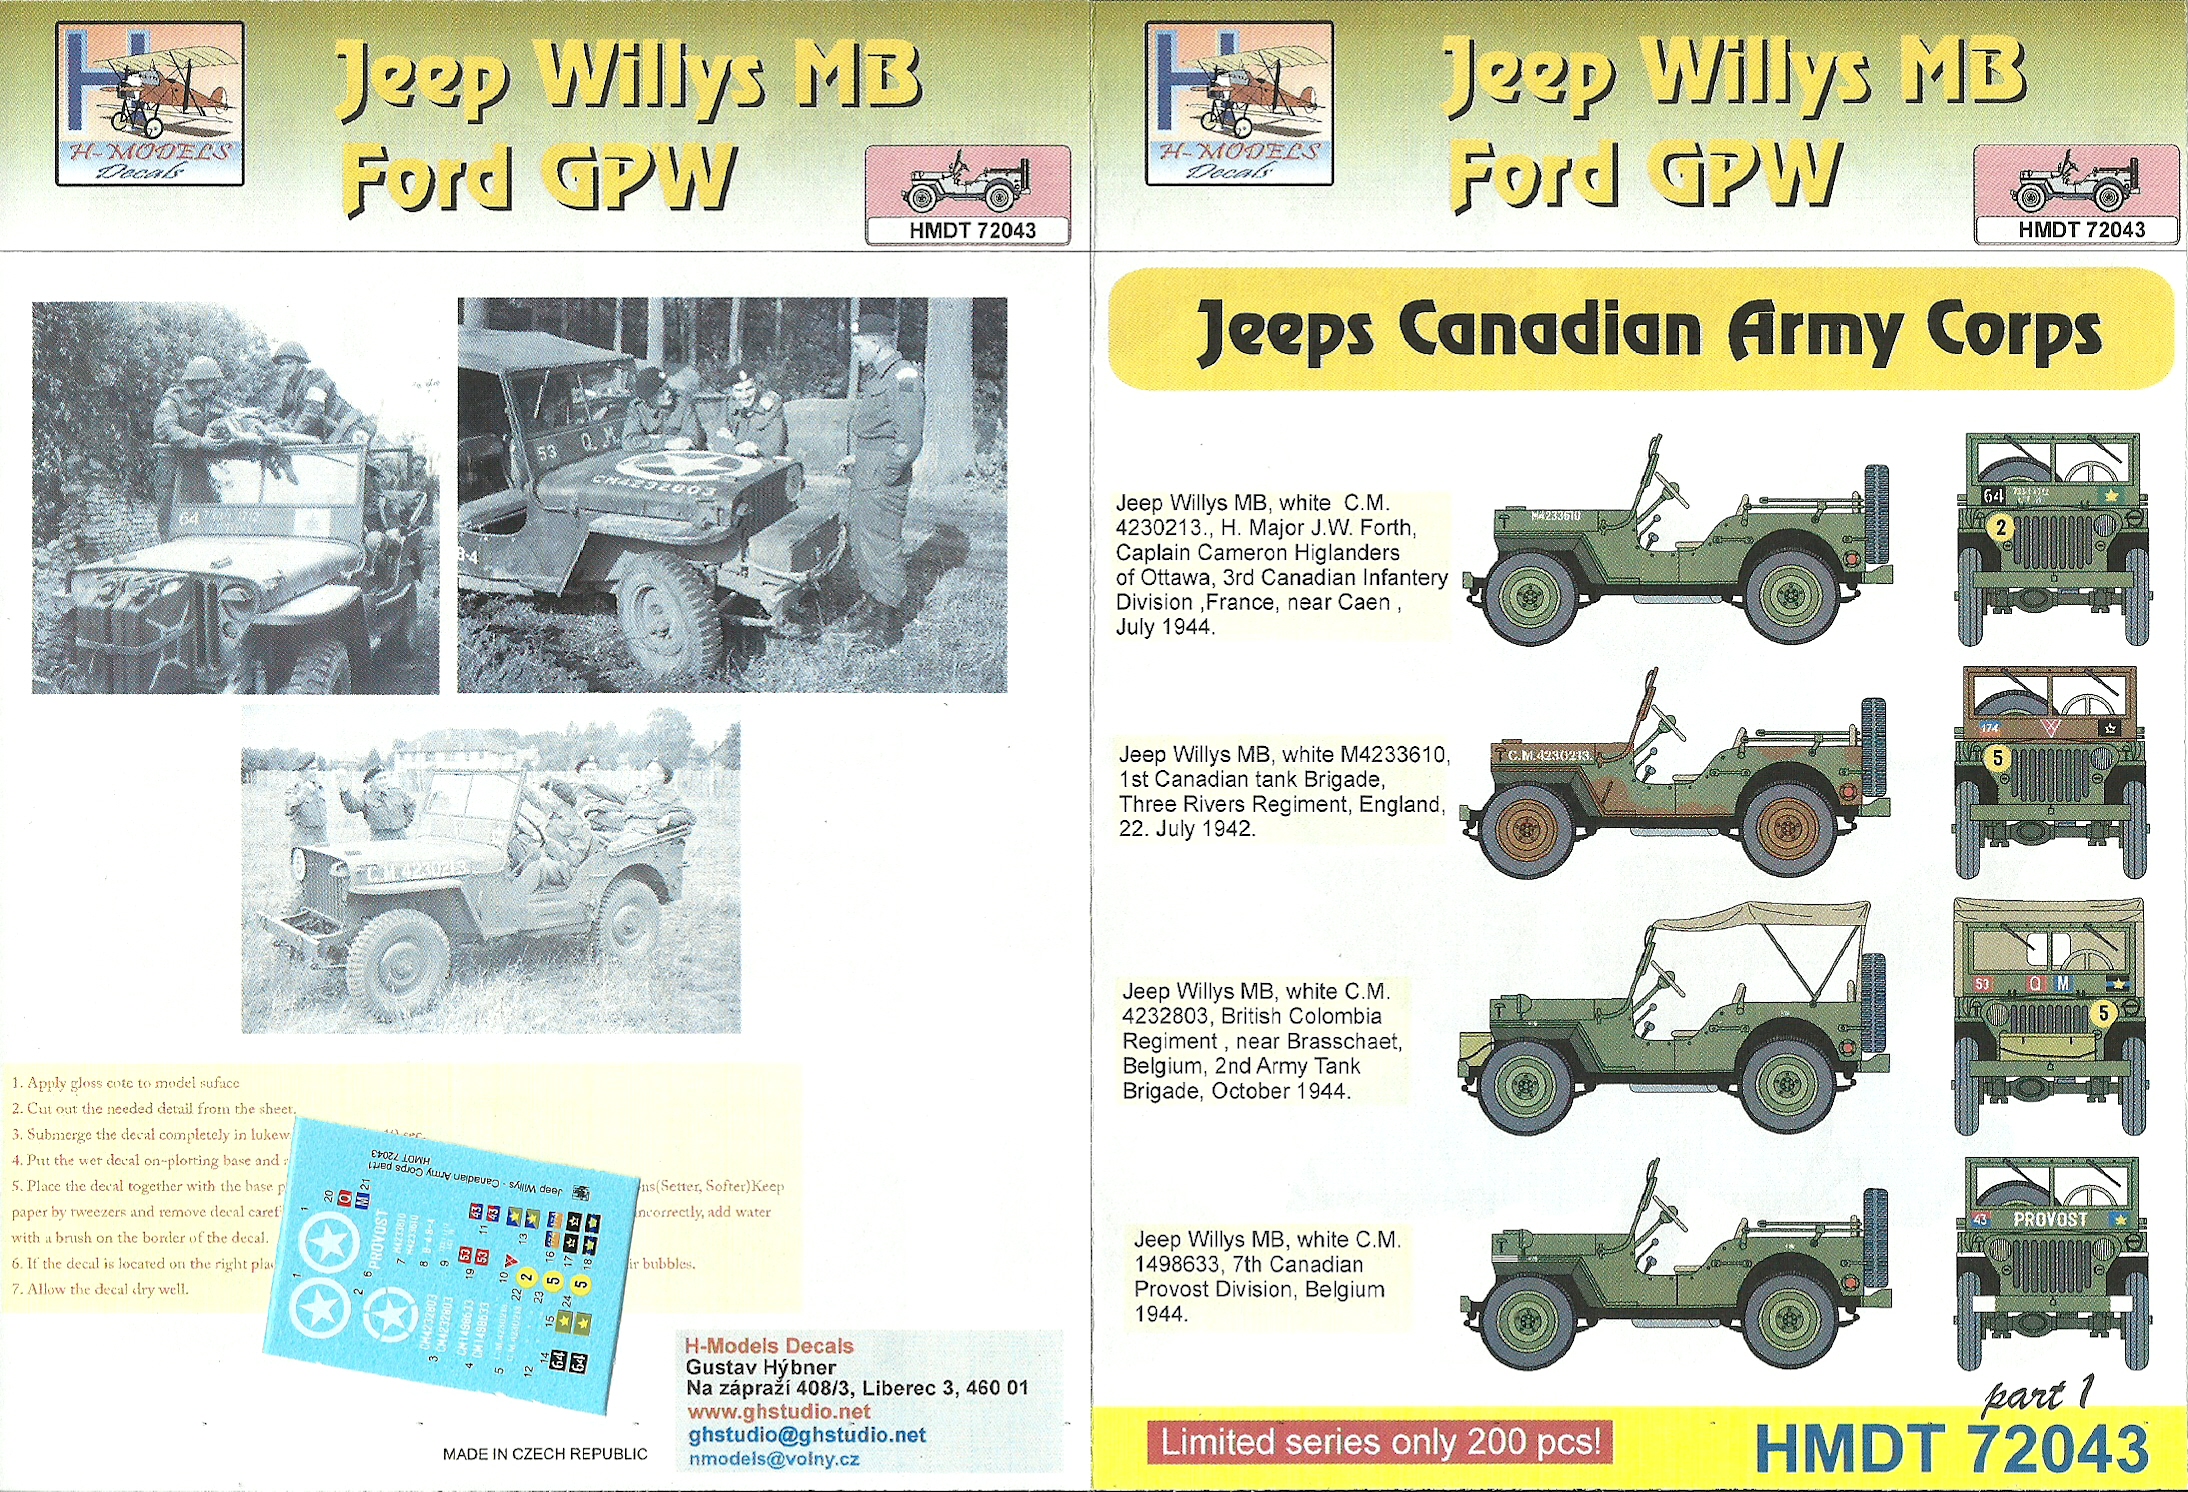 3680 Peddinghaus 1/72 Willys MB Jeep Markings 5 vehic. Instruments & Placards